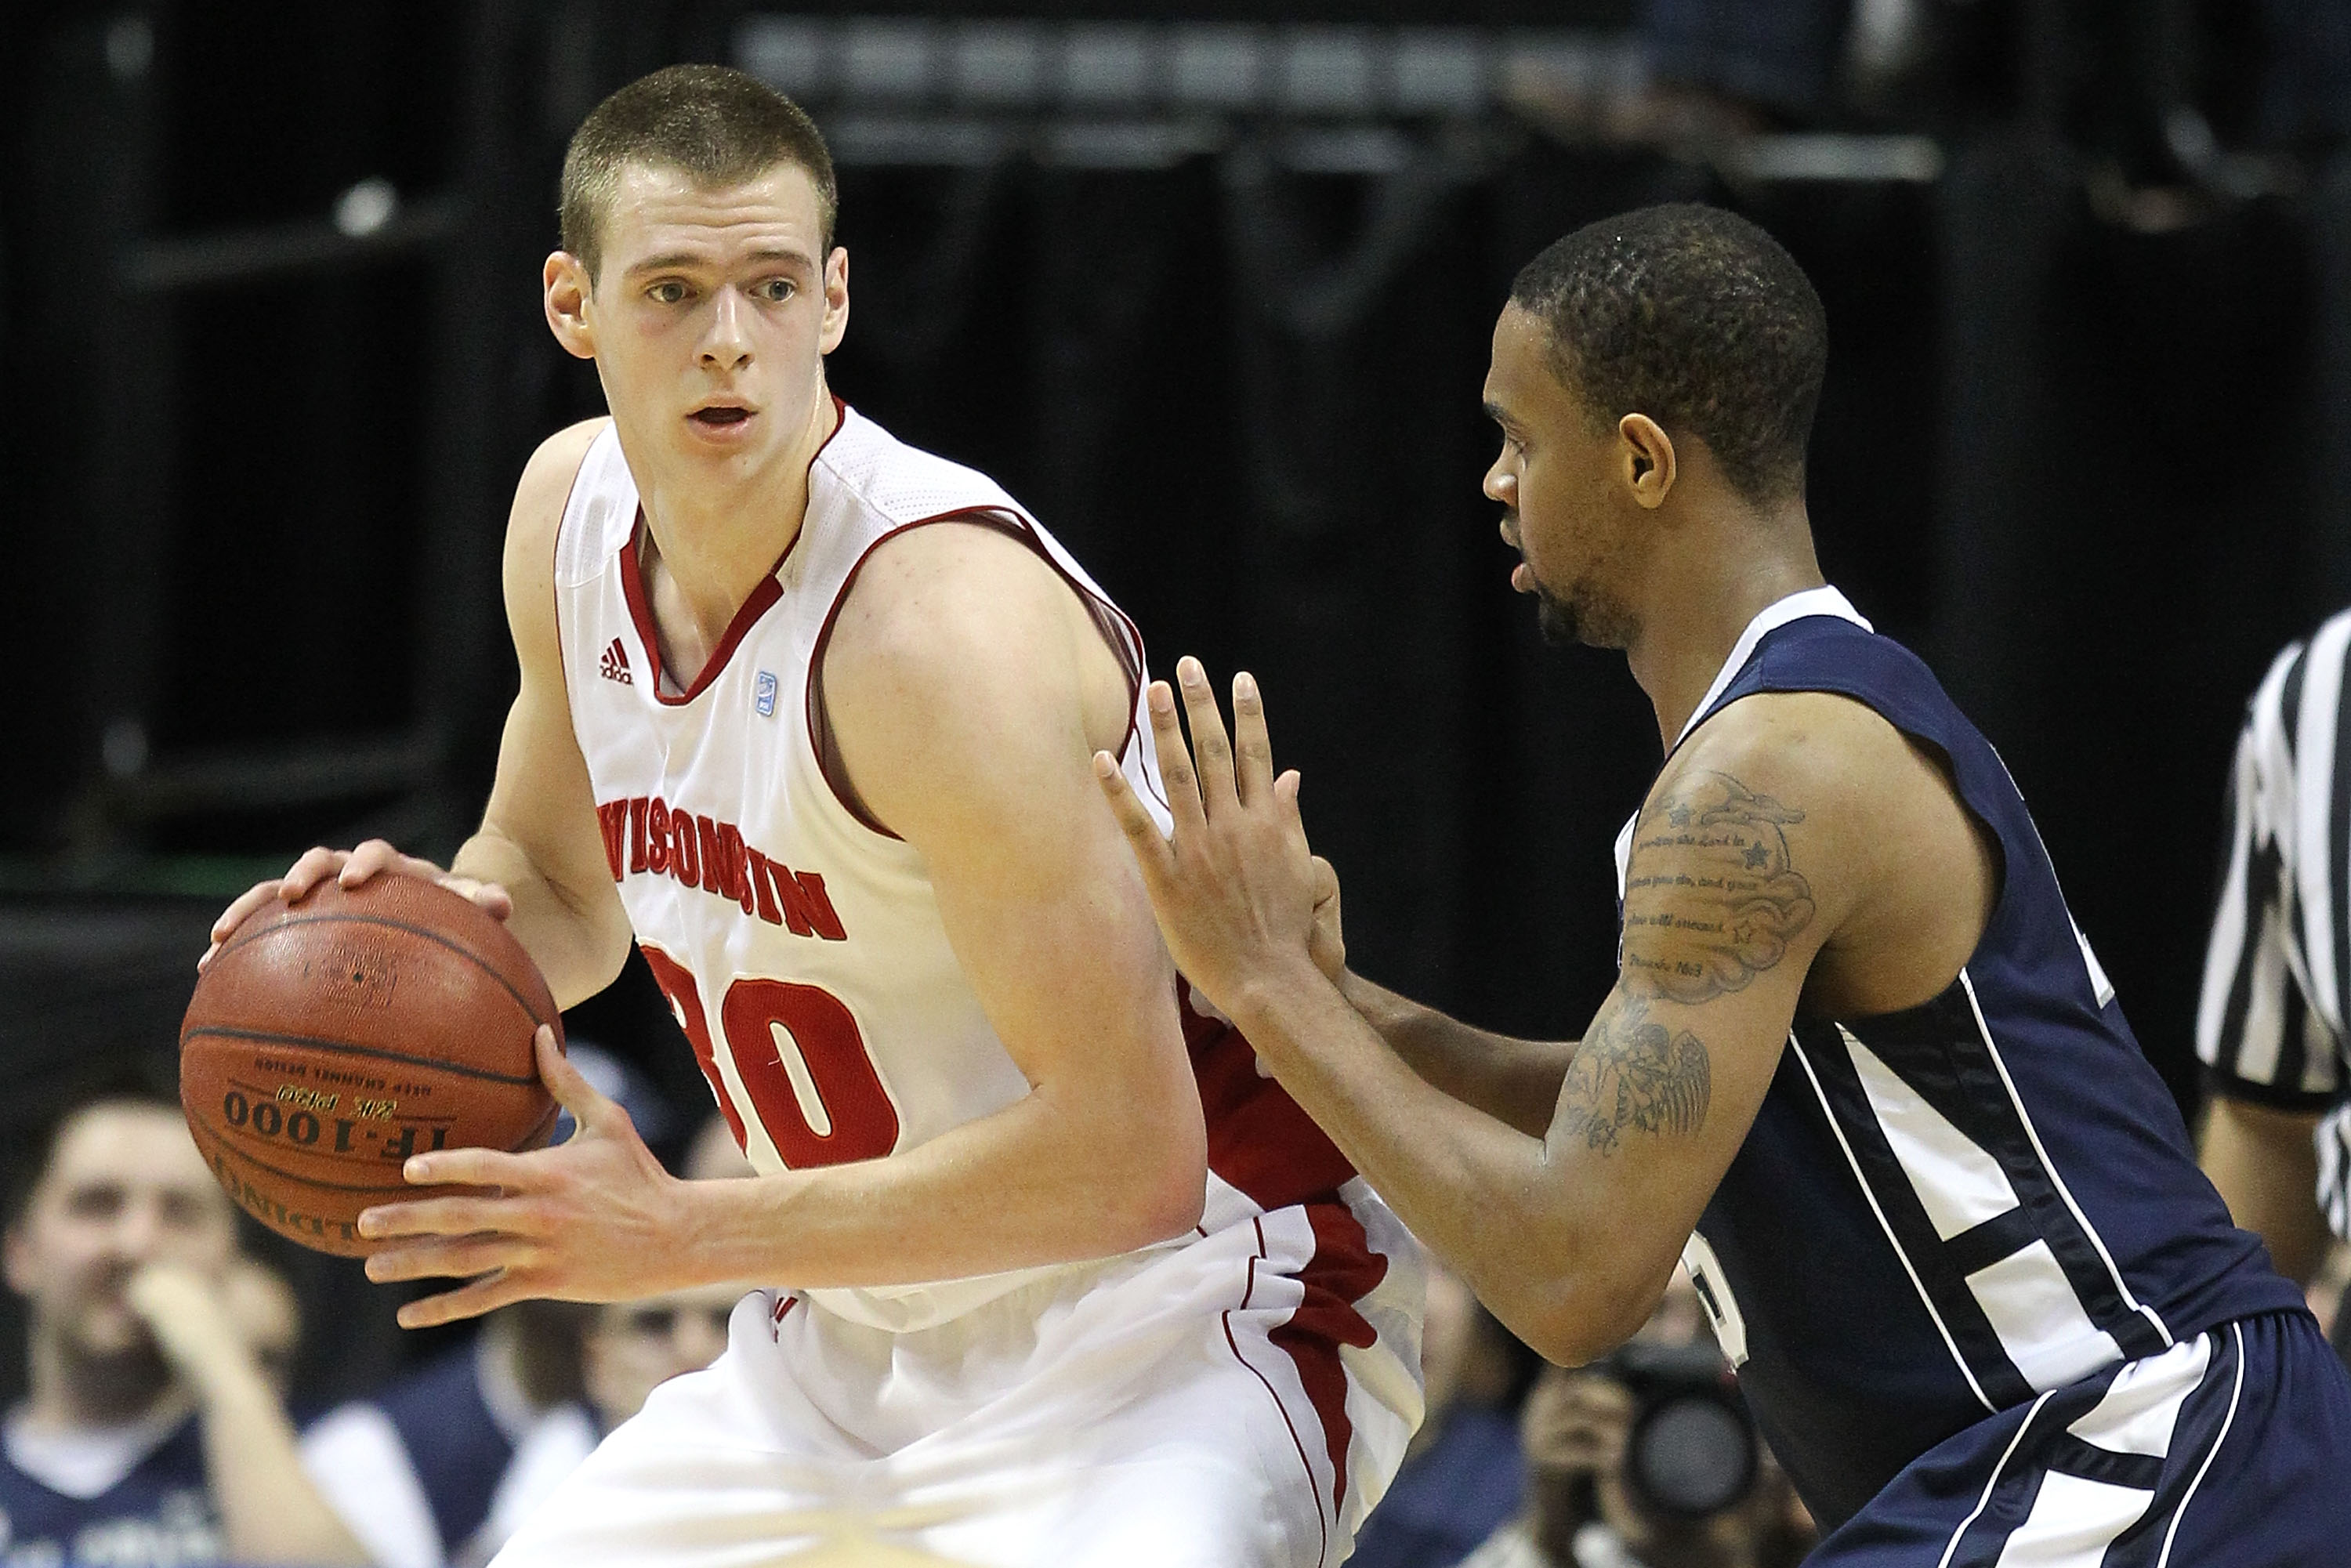 INDIANAPOLIS, IN - MARCH 11:  Jon Leuer #30 of the Wisconsin Badgers posts up against David Jackson #15 of the Penn State Nittany Lions during the quarterfinals of the 2011 Big Ten Men's Basketball Tournament at Conseco Fieldhouse on March 11, 2011 in Ind